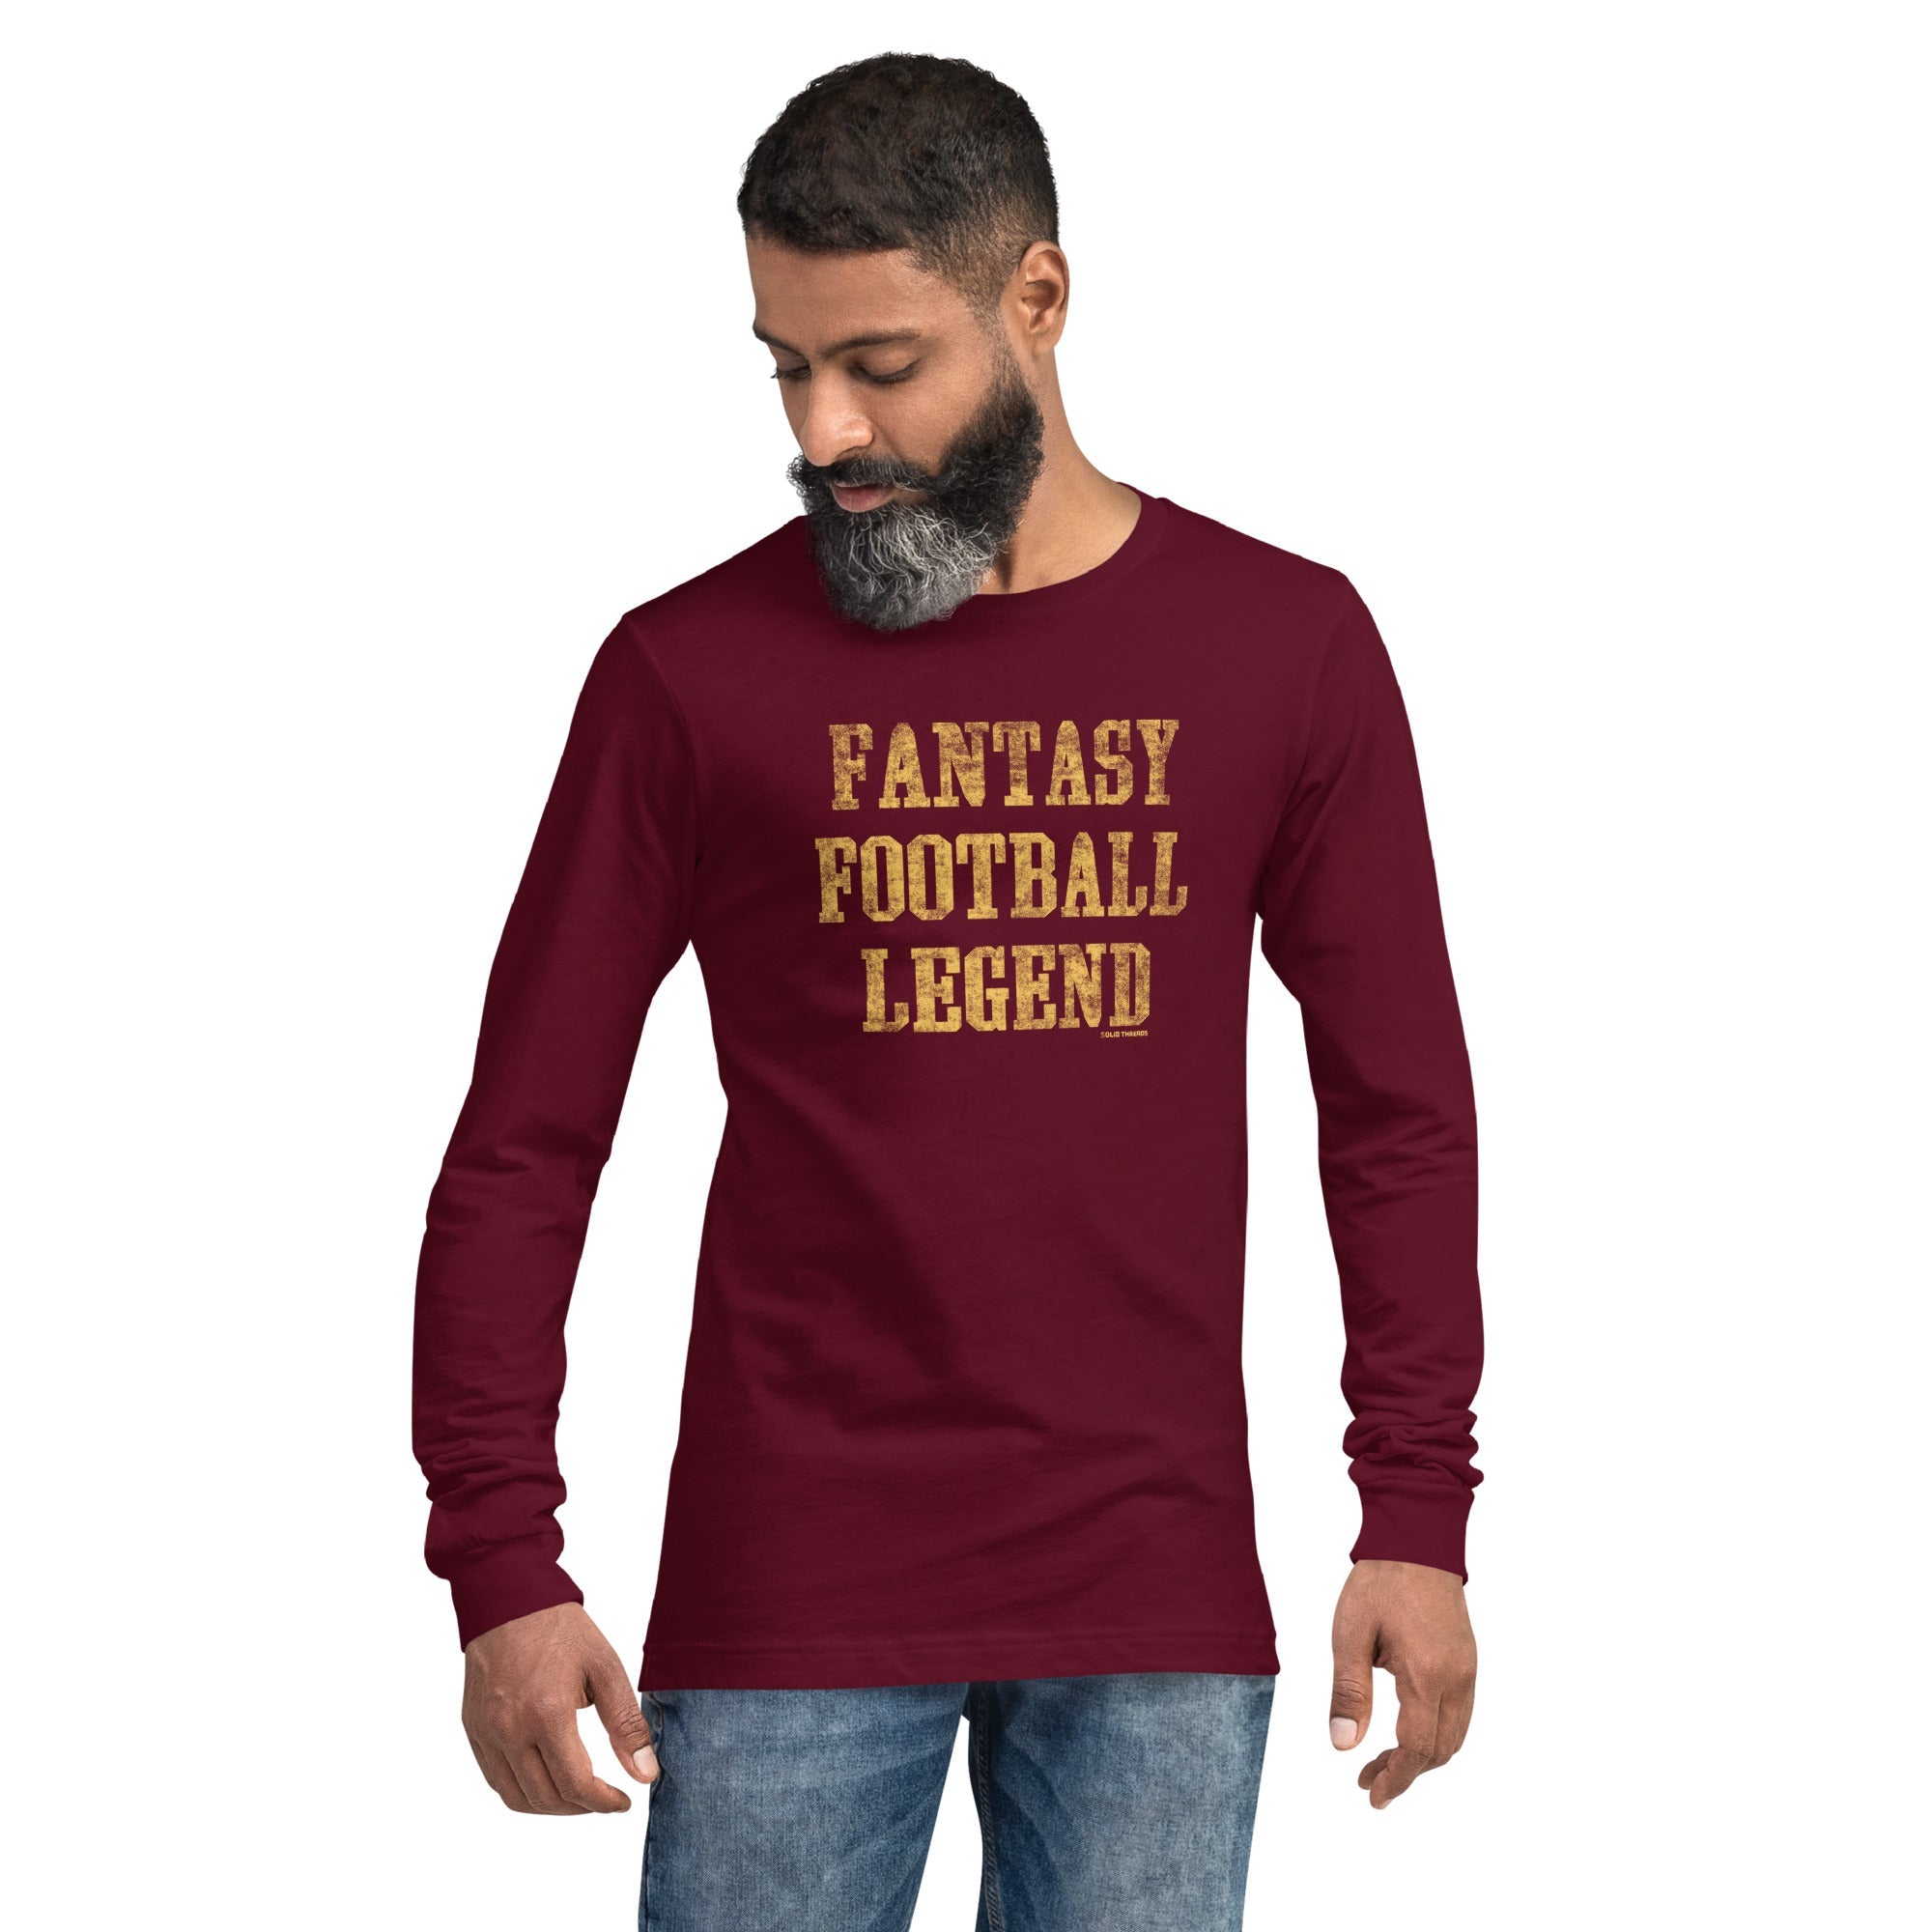 Men’s Fantasy Football Legend Vintage Graphic Tee | Funny Sports T shirt on Model | Solid Threads